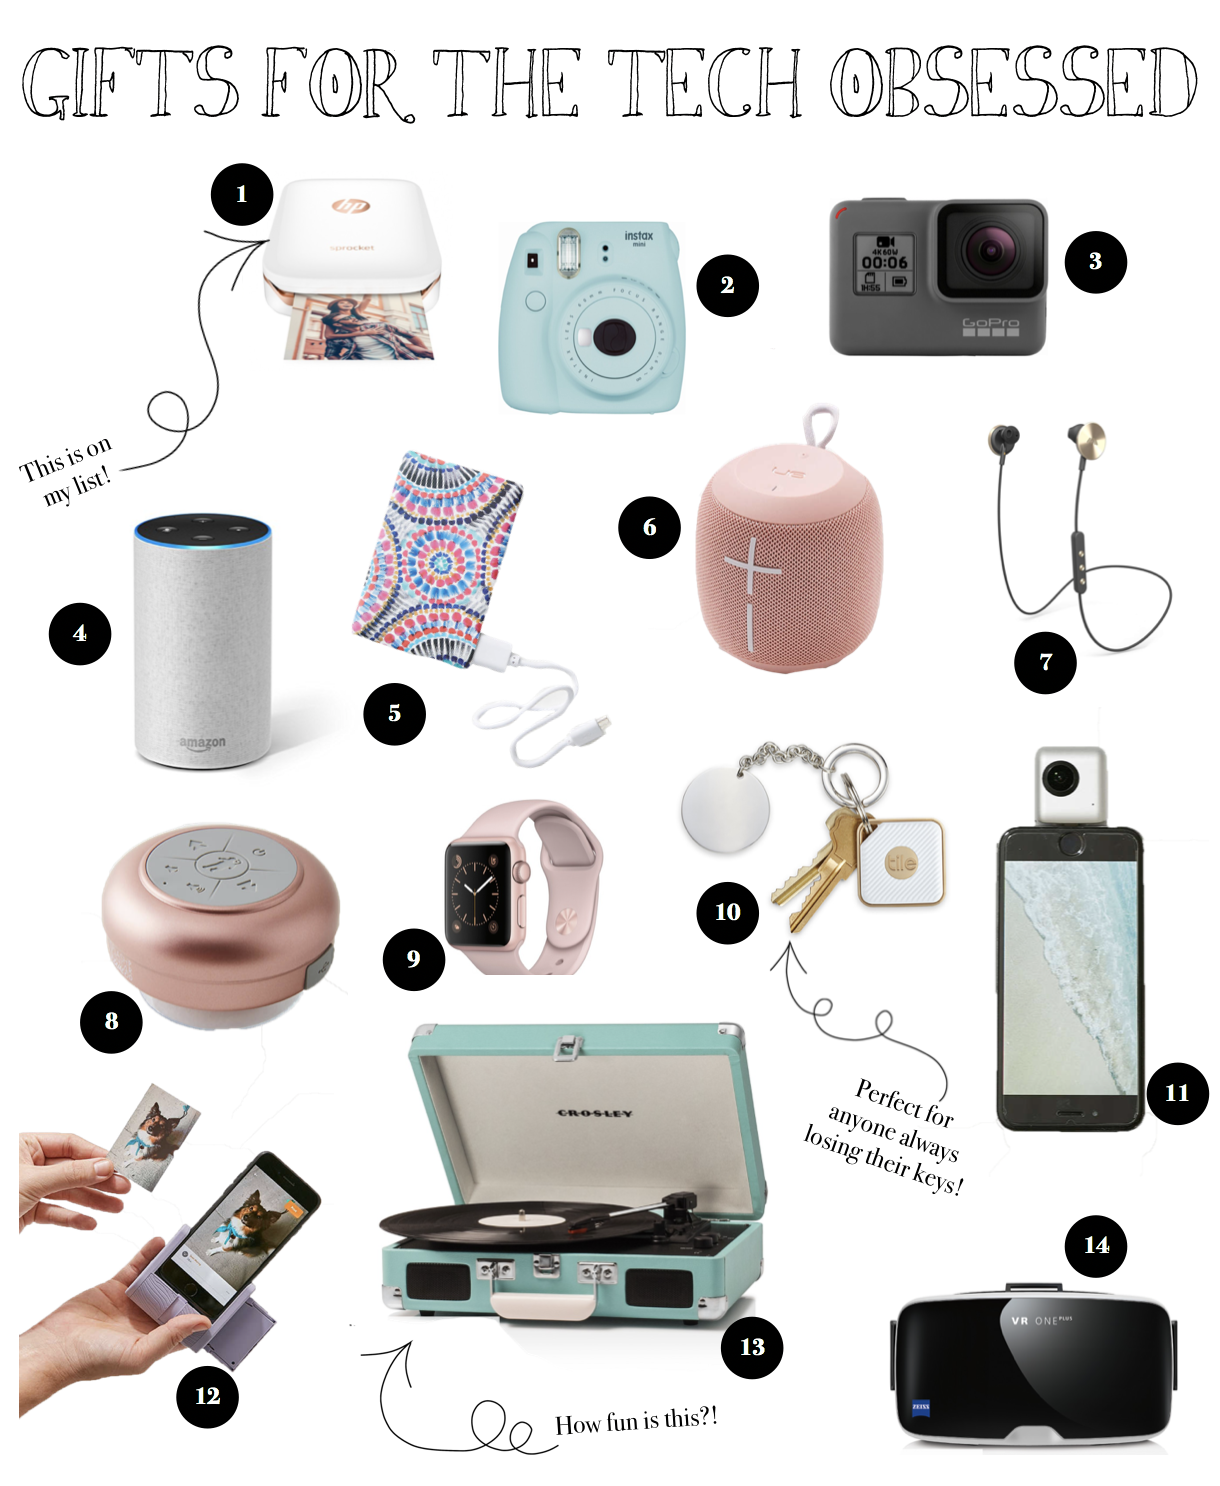 12 Gift Guides of 2017 Gift ideas for the technology lover, cameras, printers, gadgets, and more! on fashion blog daily dose of charm by lauren lindmark